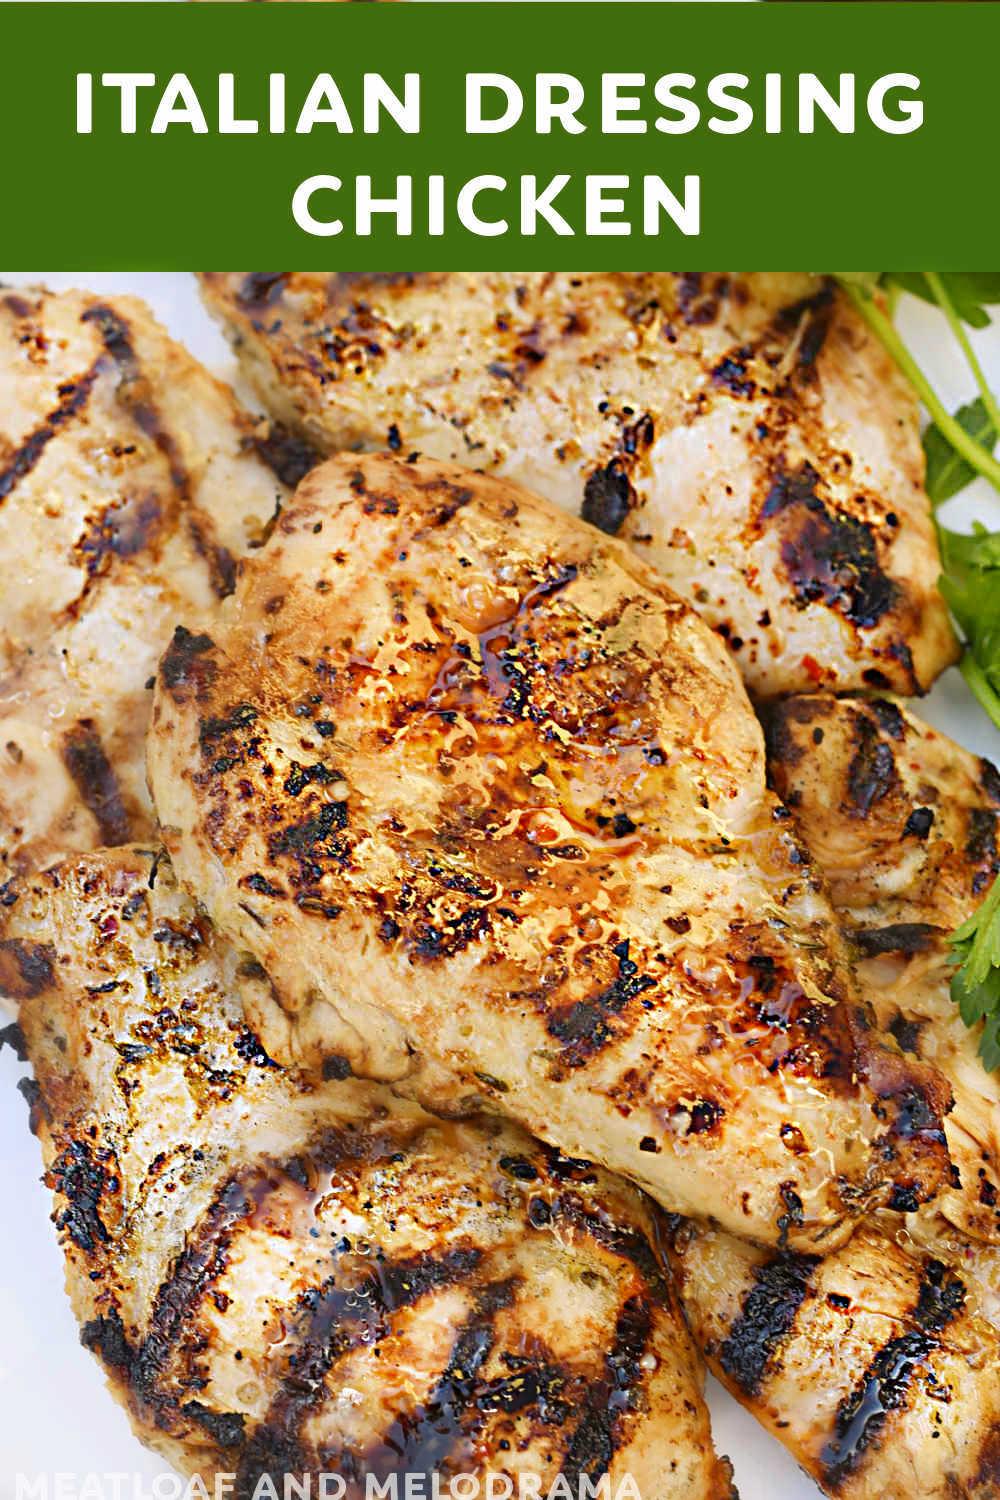 Make Italian Dressing Chicken breasts with 4 ingredients. Marinate and grill or bake in oven for tender, juicy chicken with this easy recipe via @meamel